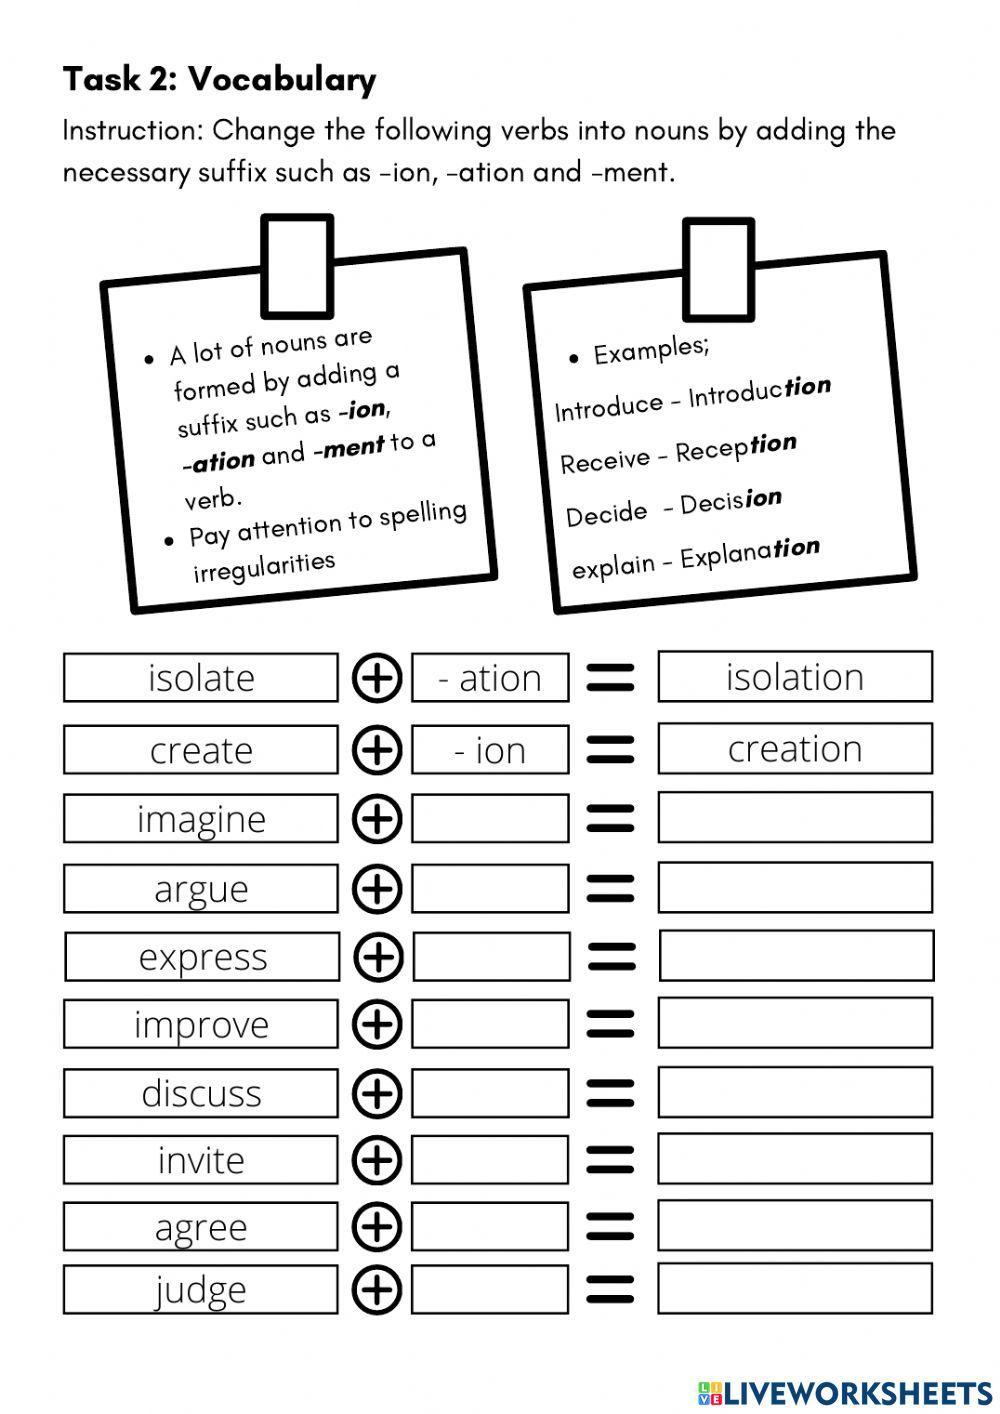 Word building - Changing Verbs to Nouns